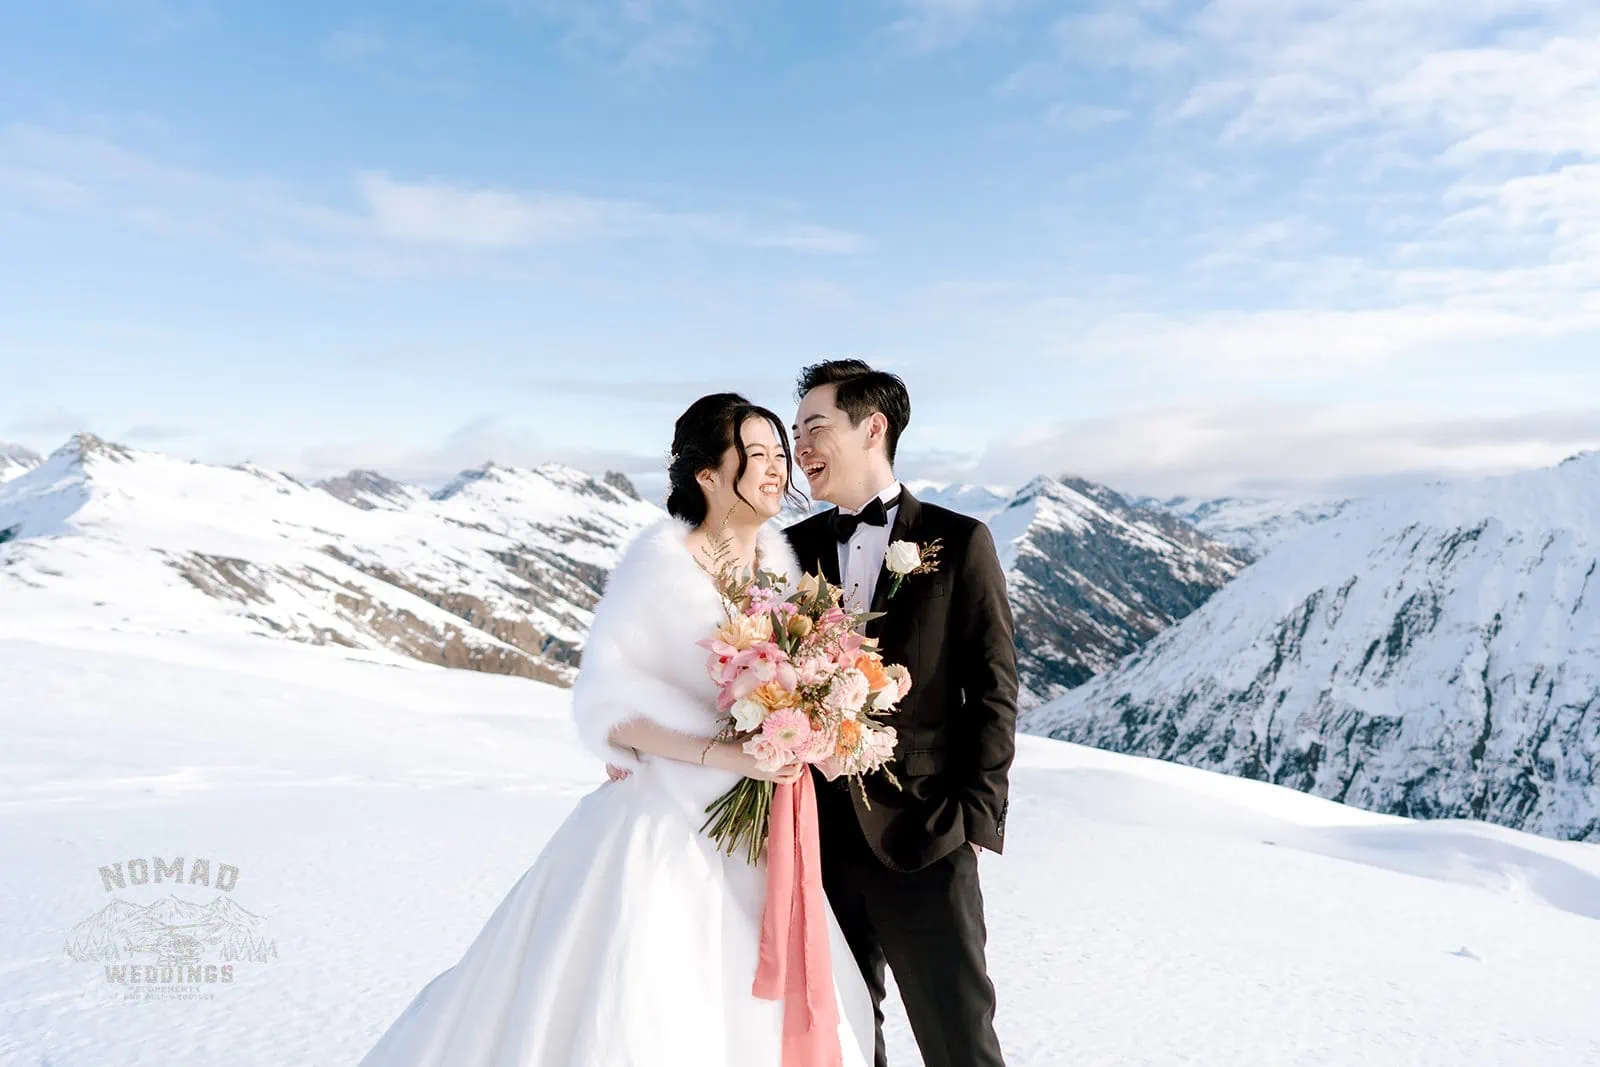 Queenstown New Zealand Elopement Wedding Photographer - Bo and Junyi, a bride and groom, embark on a breathtaking Heli Pre Wedding Shoot atop a snow-covered mountain with 4 thrilling landings.